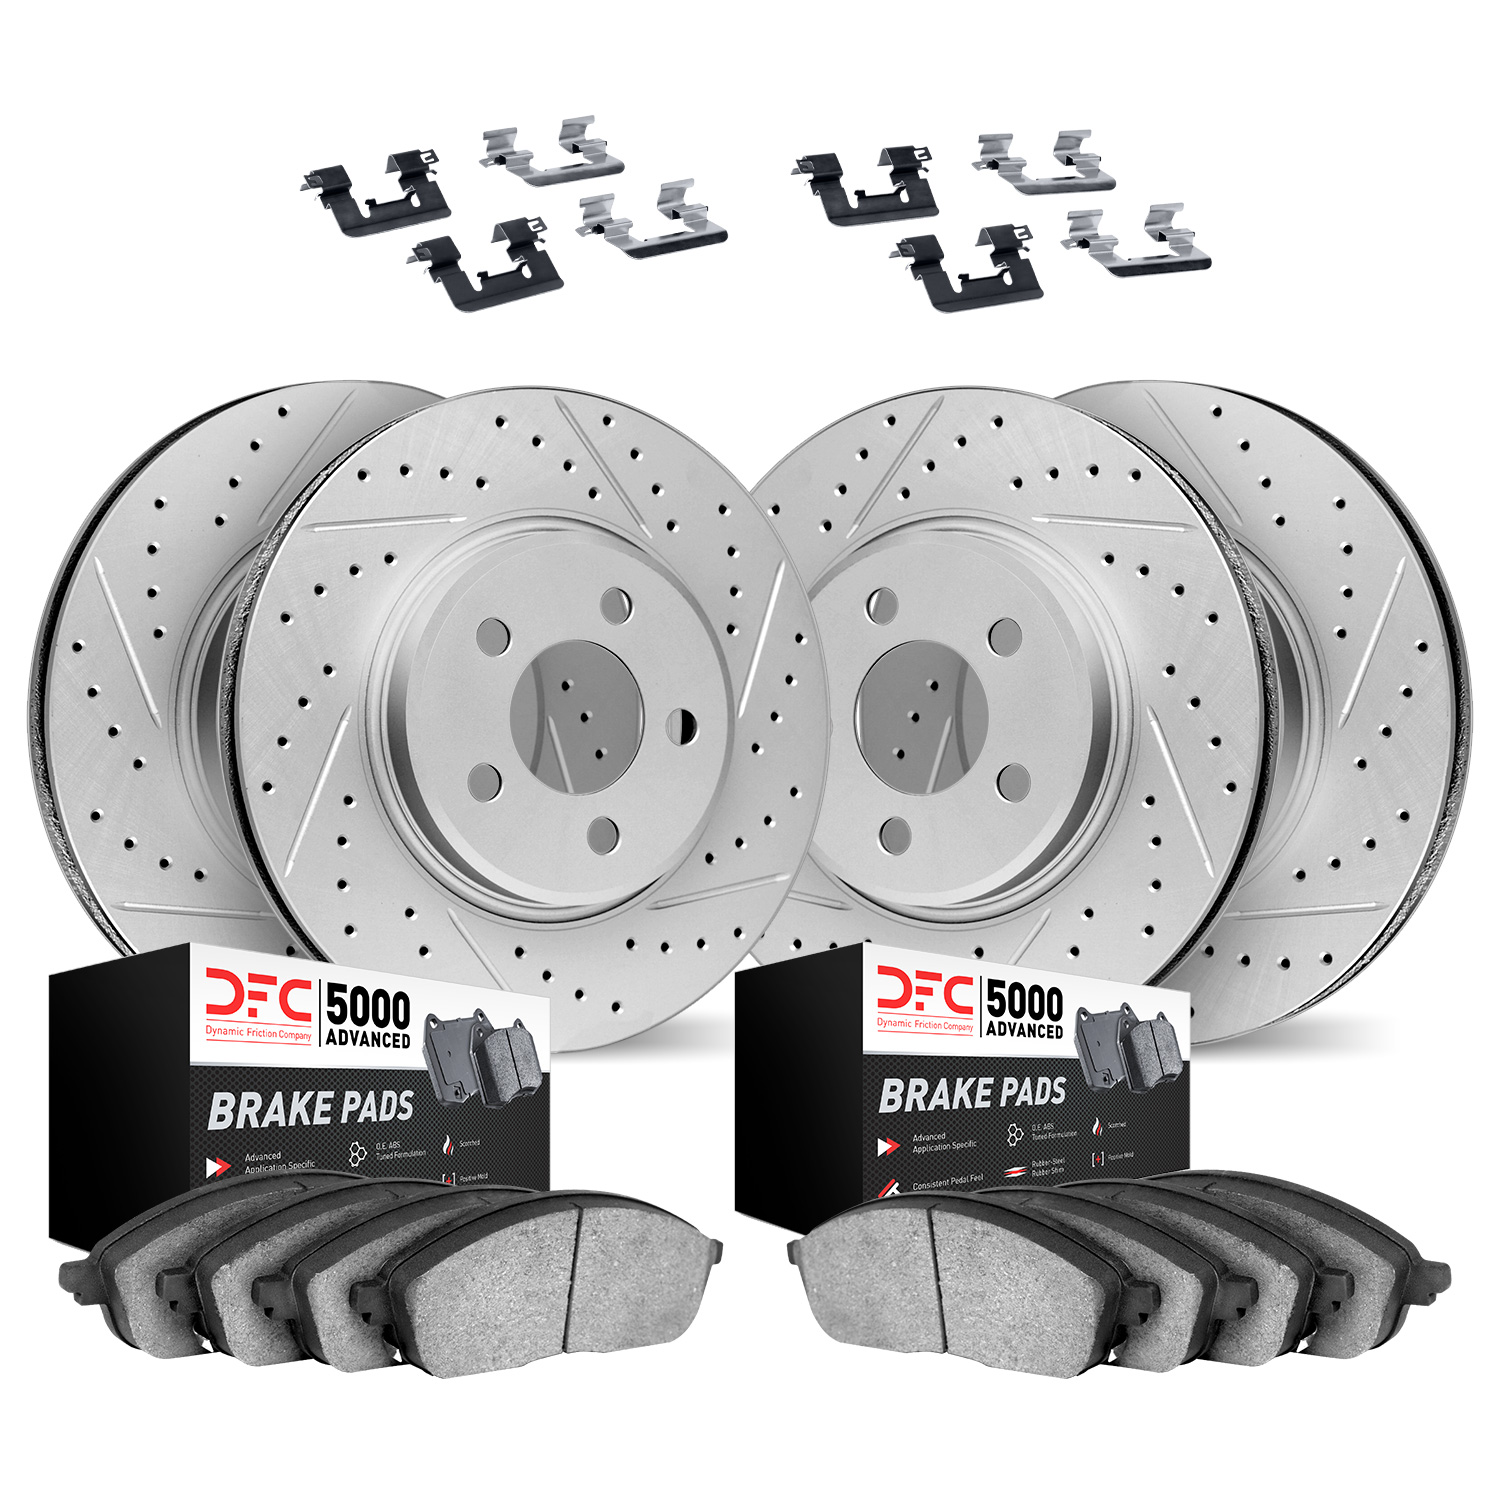 2514-11005 Geoperformance Drilled/Slotted Rotors w/5000 Advanced Brake Pads Kit & Hardware, 2014-2017 Land Rover, Position: Fron